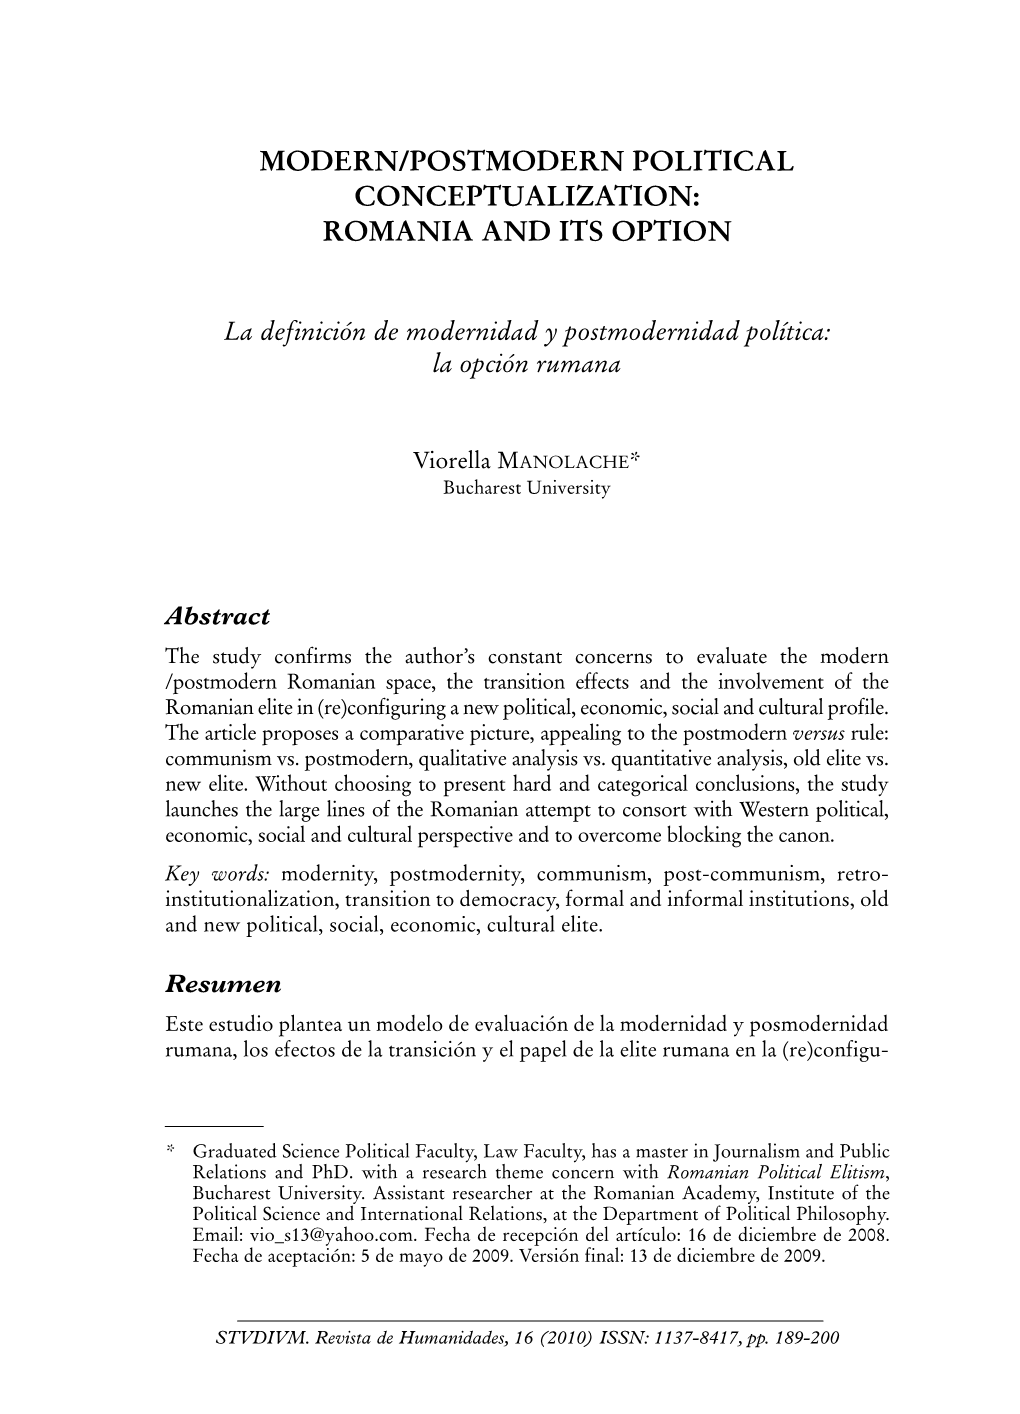 Modern/Postmodern Political Conceptualization: Romania and Its Option